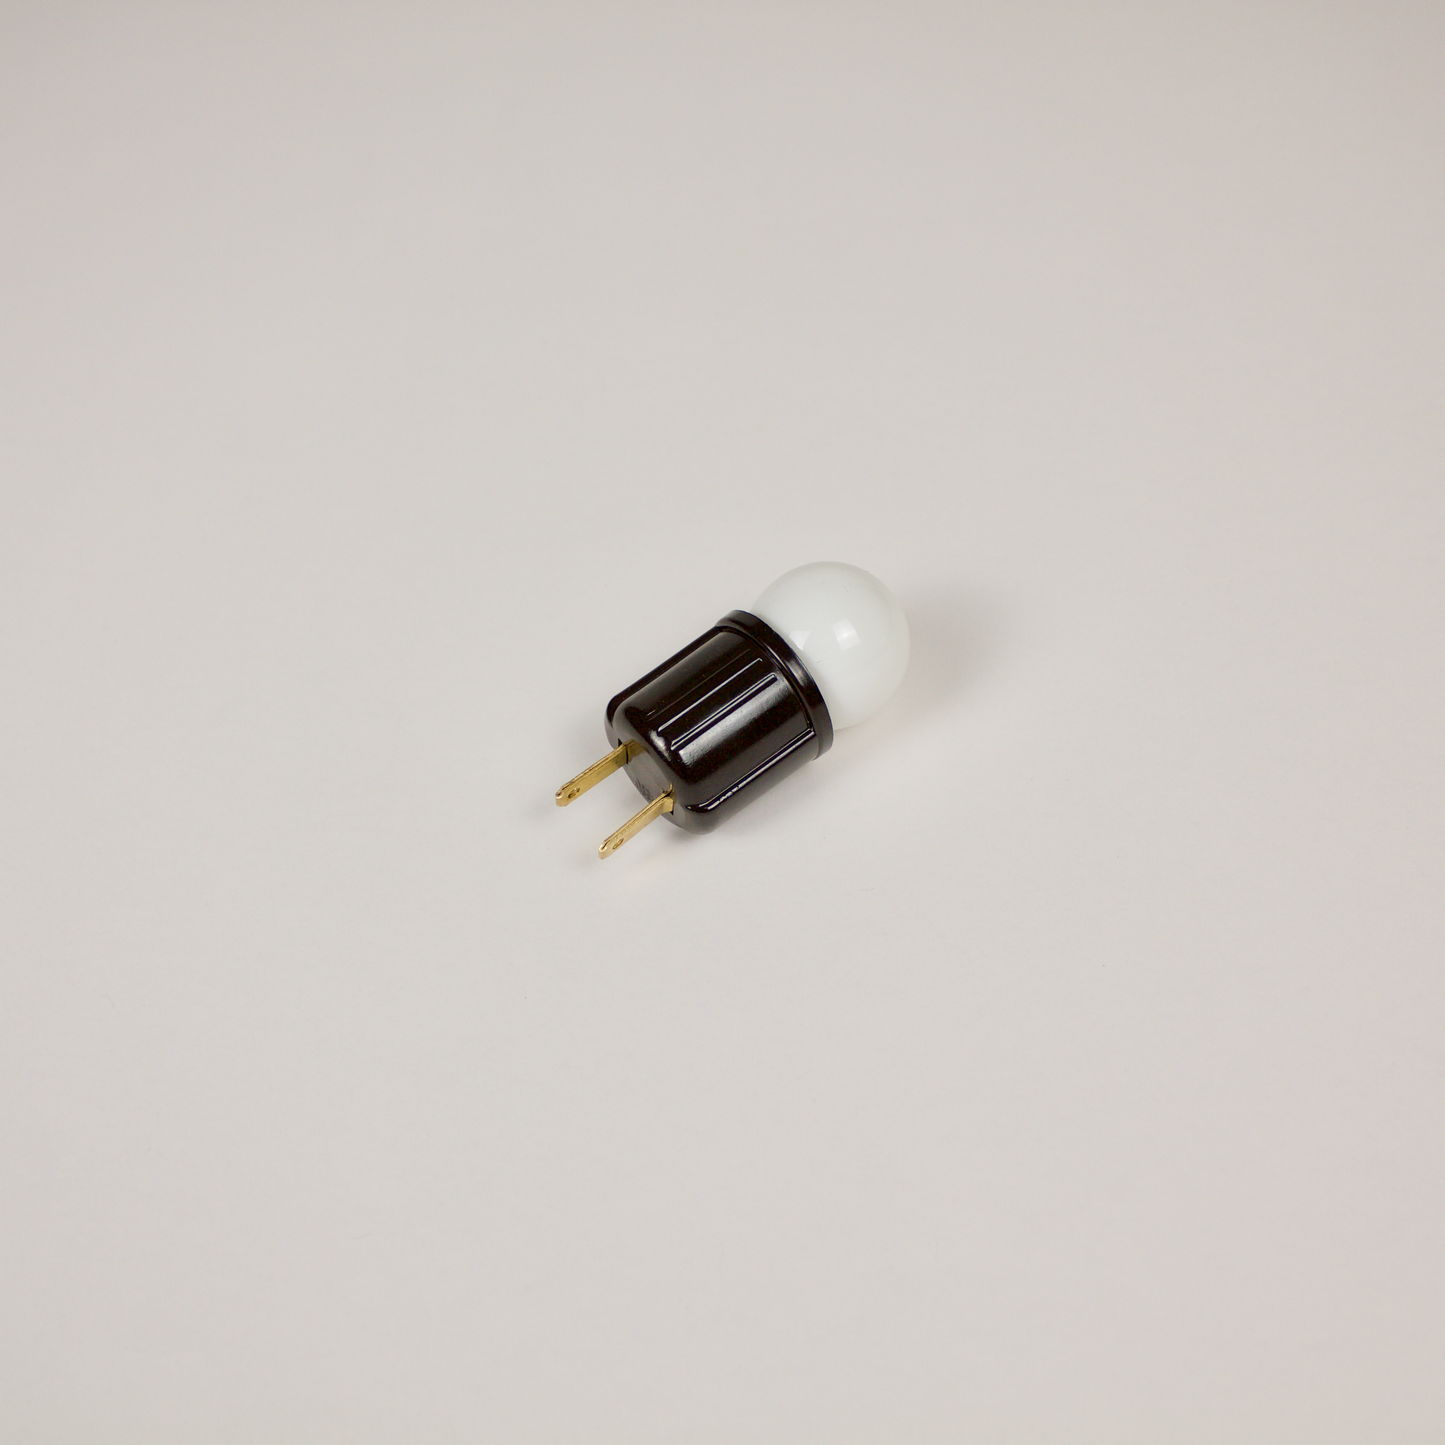 Simple Bulb and Socket